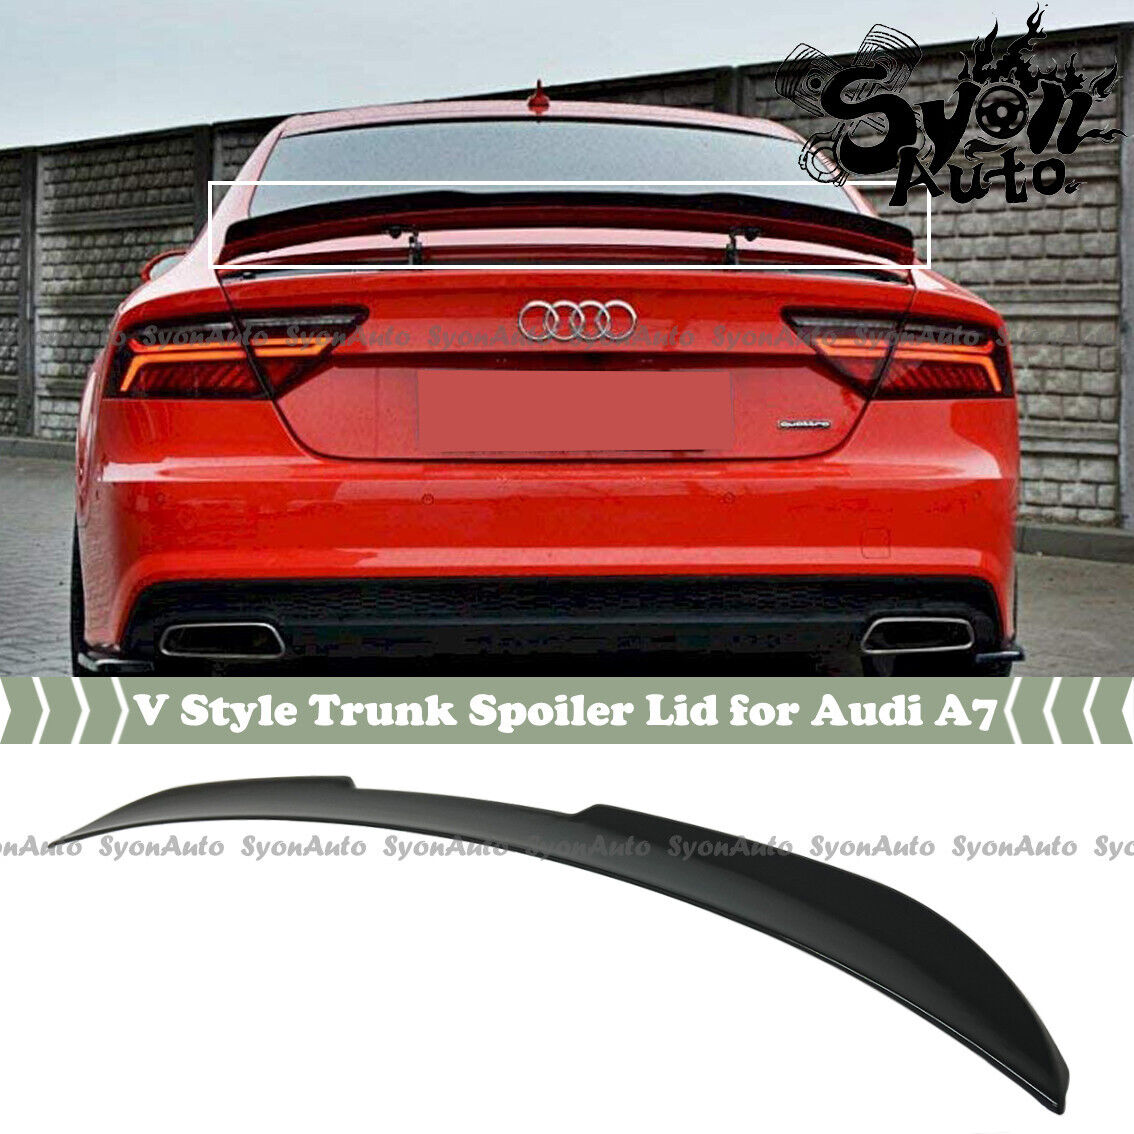 FITS 12-2018 AUDI A7 S7 RS7 V STYLE GLOSS BLACK REAR TRUNK SPOILER EXTENSION LID